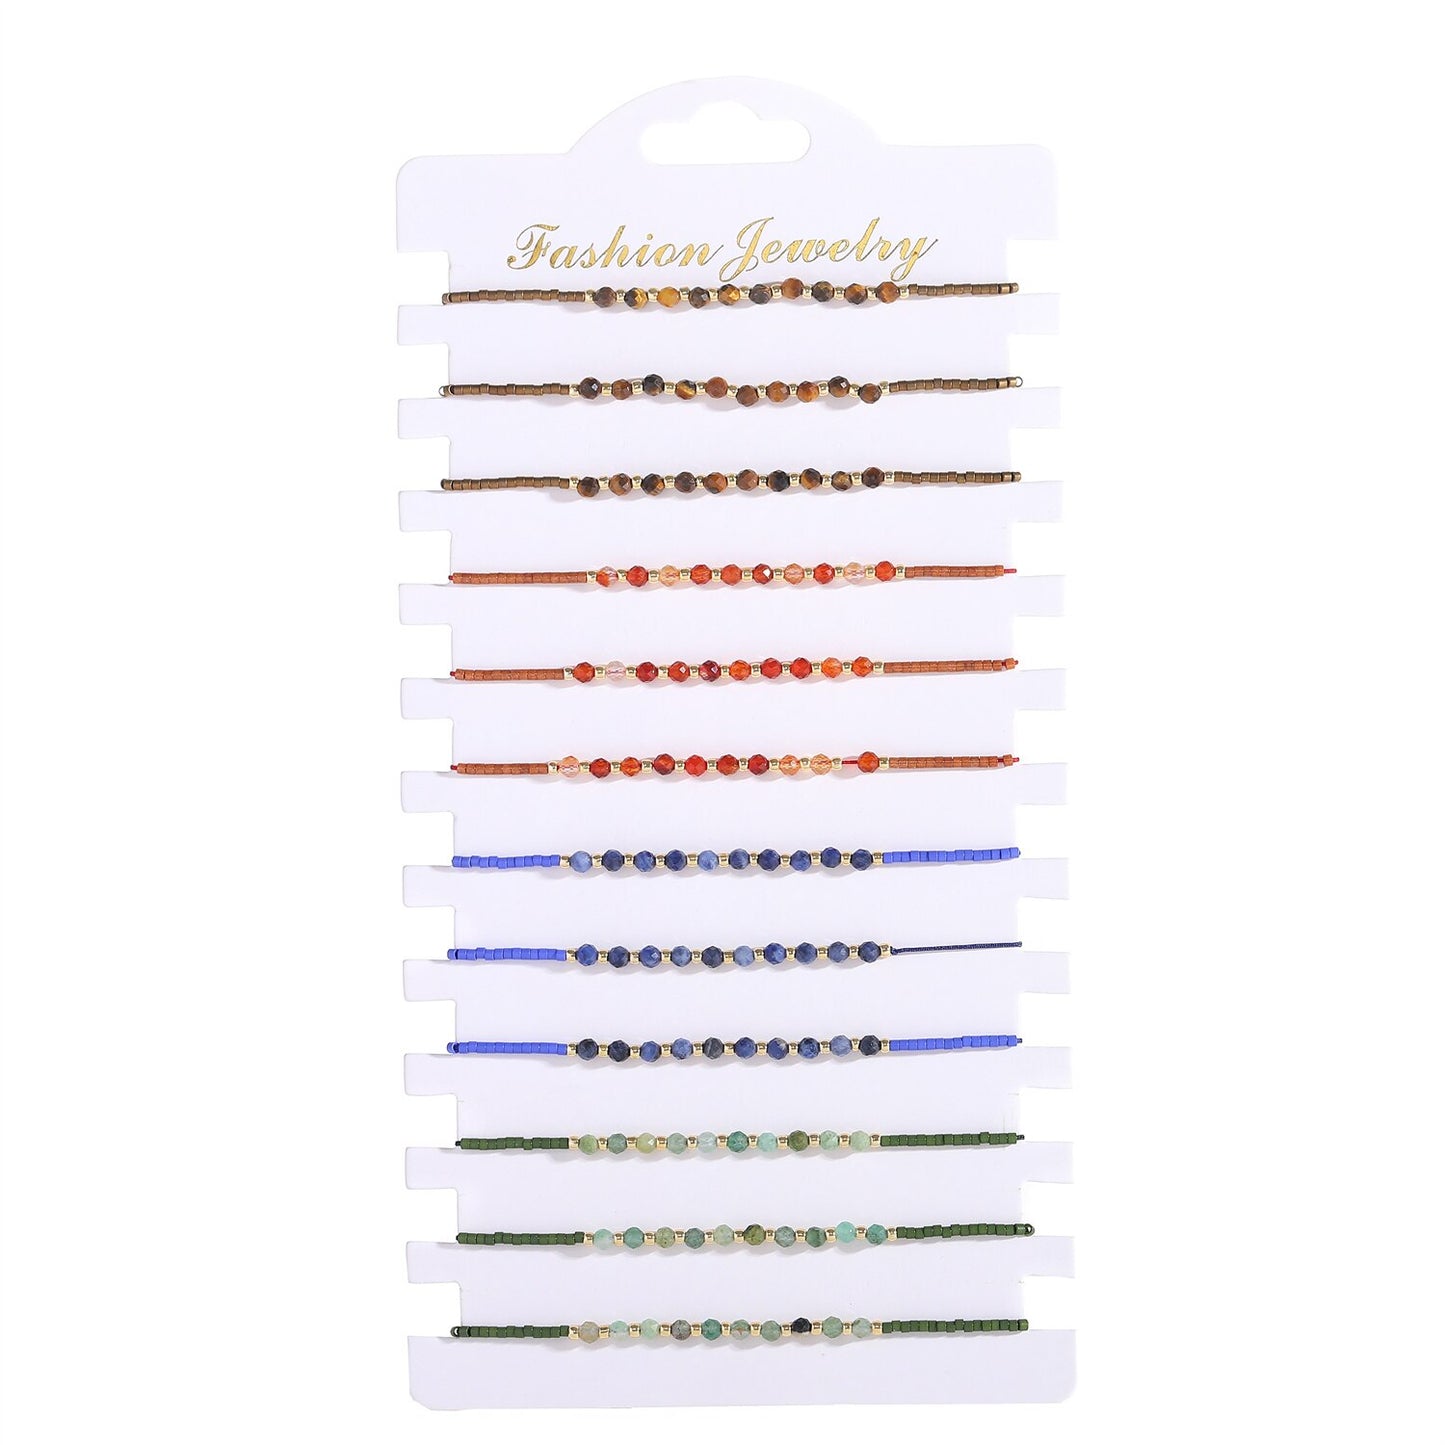 12pcs/lot Colorful Crystal Beads Charms Bracelet for Women Men Adjustable Hand Woven Bracelet Anklet Jewelry Gift Wholesale